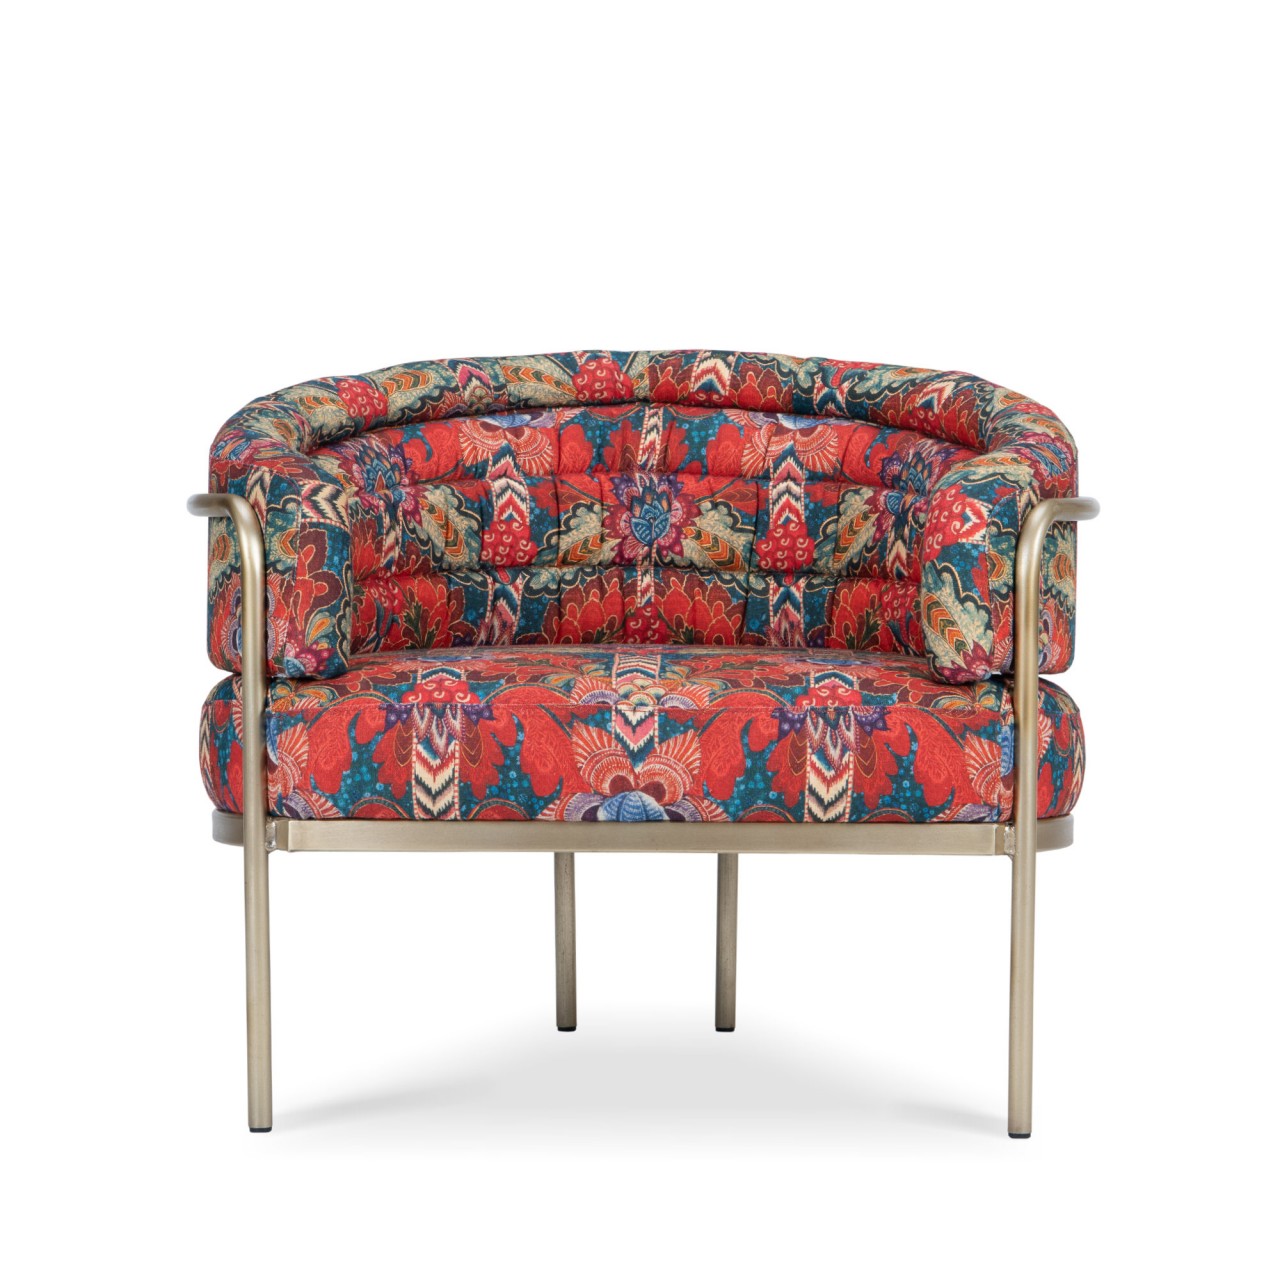 PEREGRINE CHAIR - PSYCHEDELIA Linen